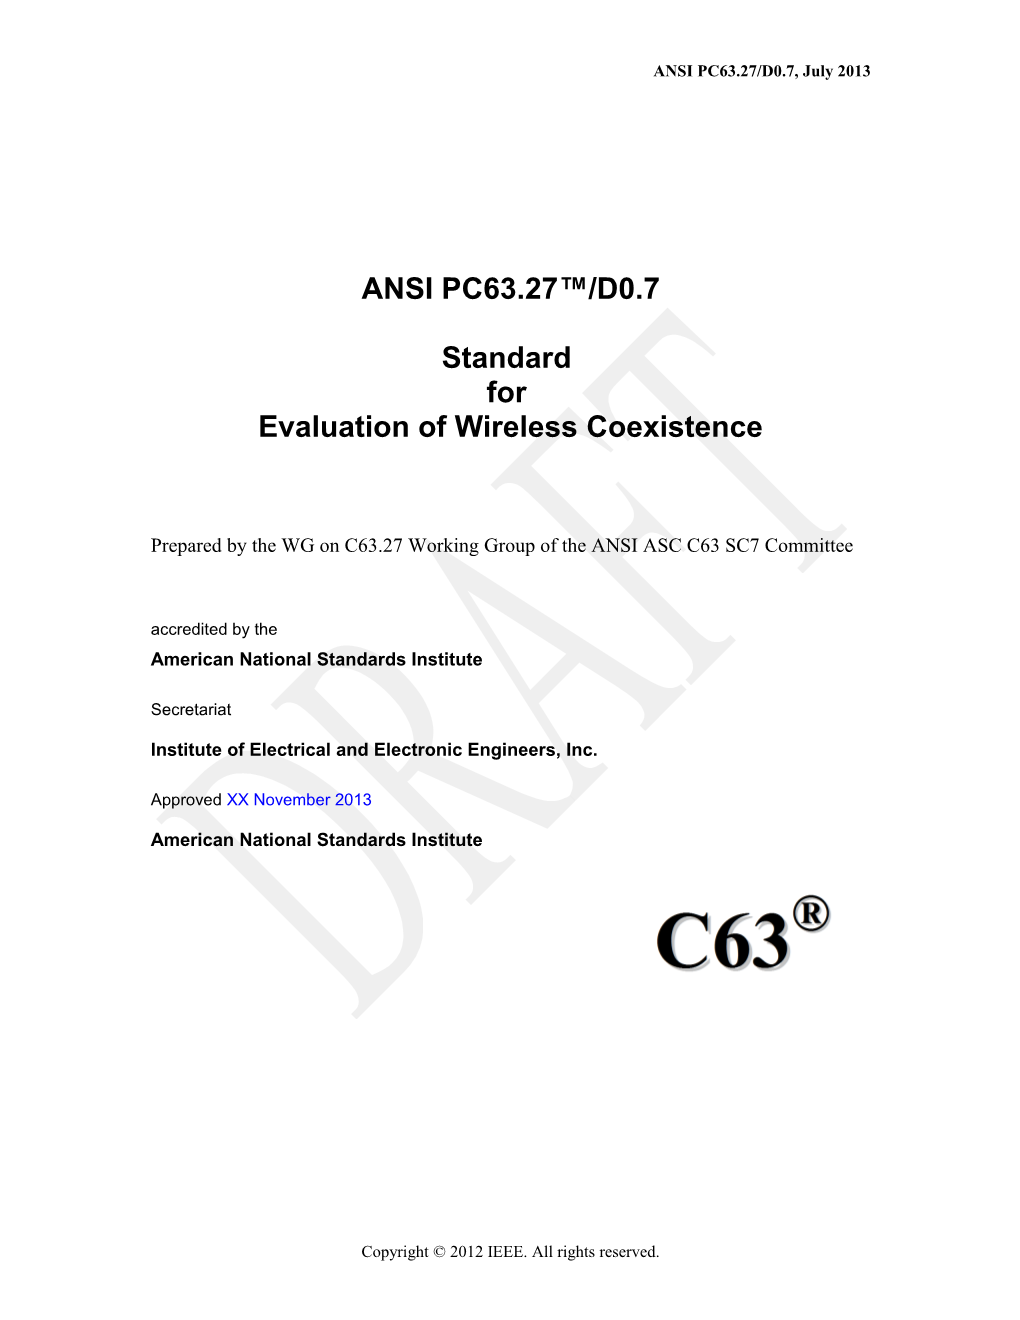 ANSI PC63.27 /D0.7 Standard for Evaluation of Wireless Coexistence